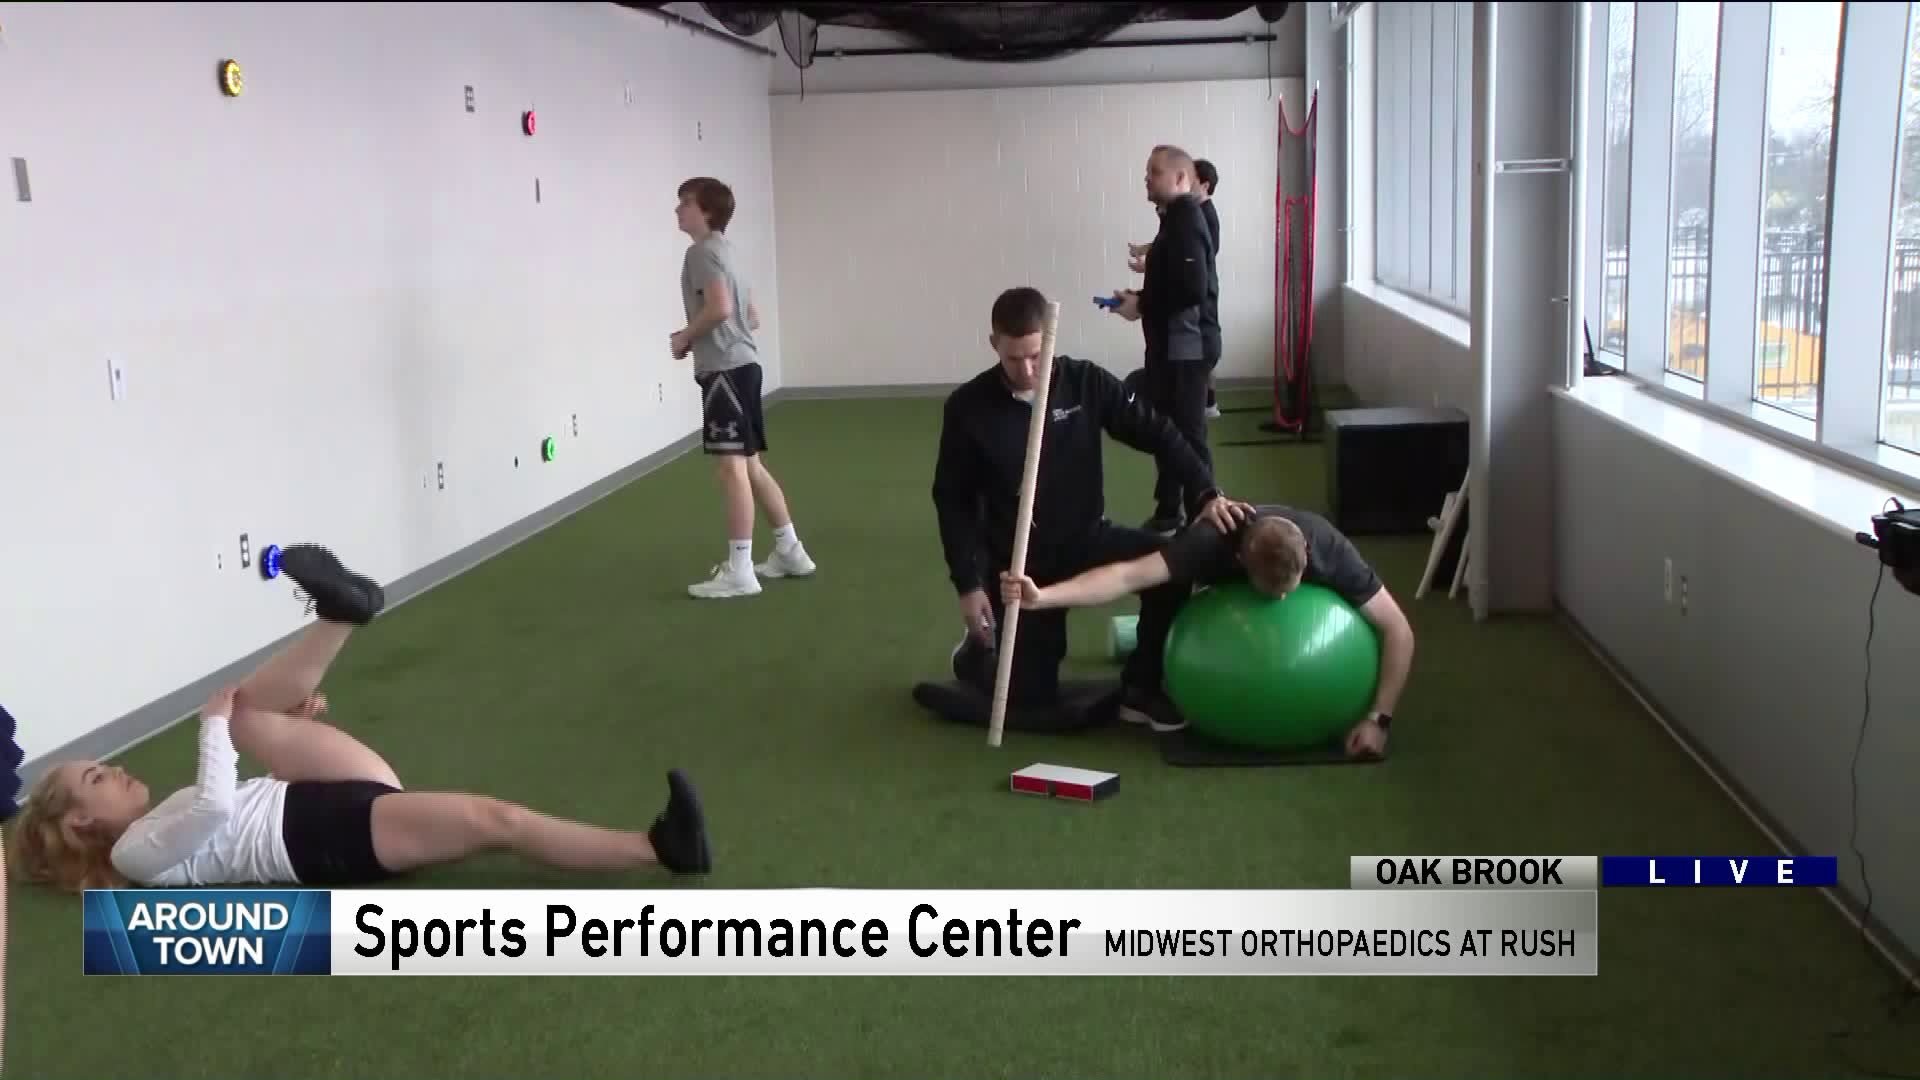 Around Town checks out the Sports Performance Center at Midwest Orthopaedics at Rush